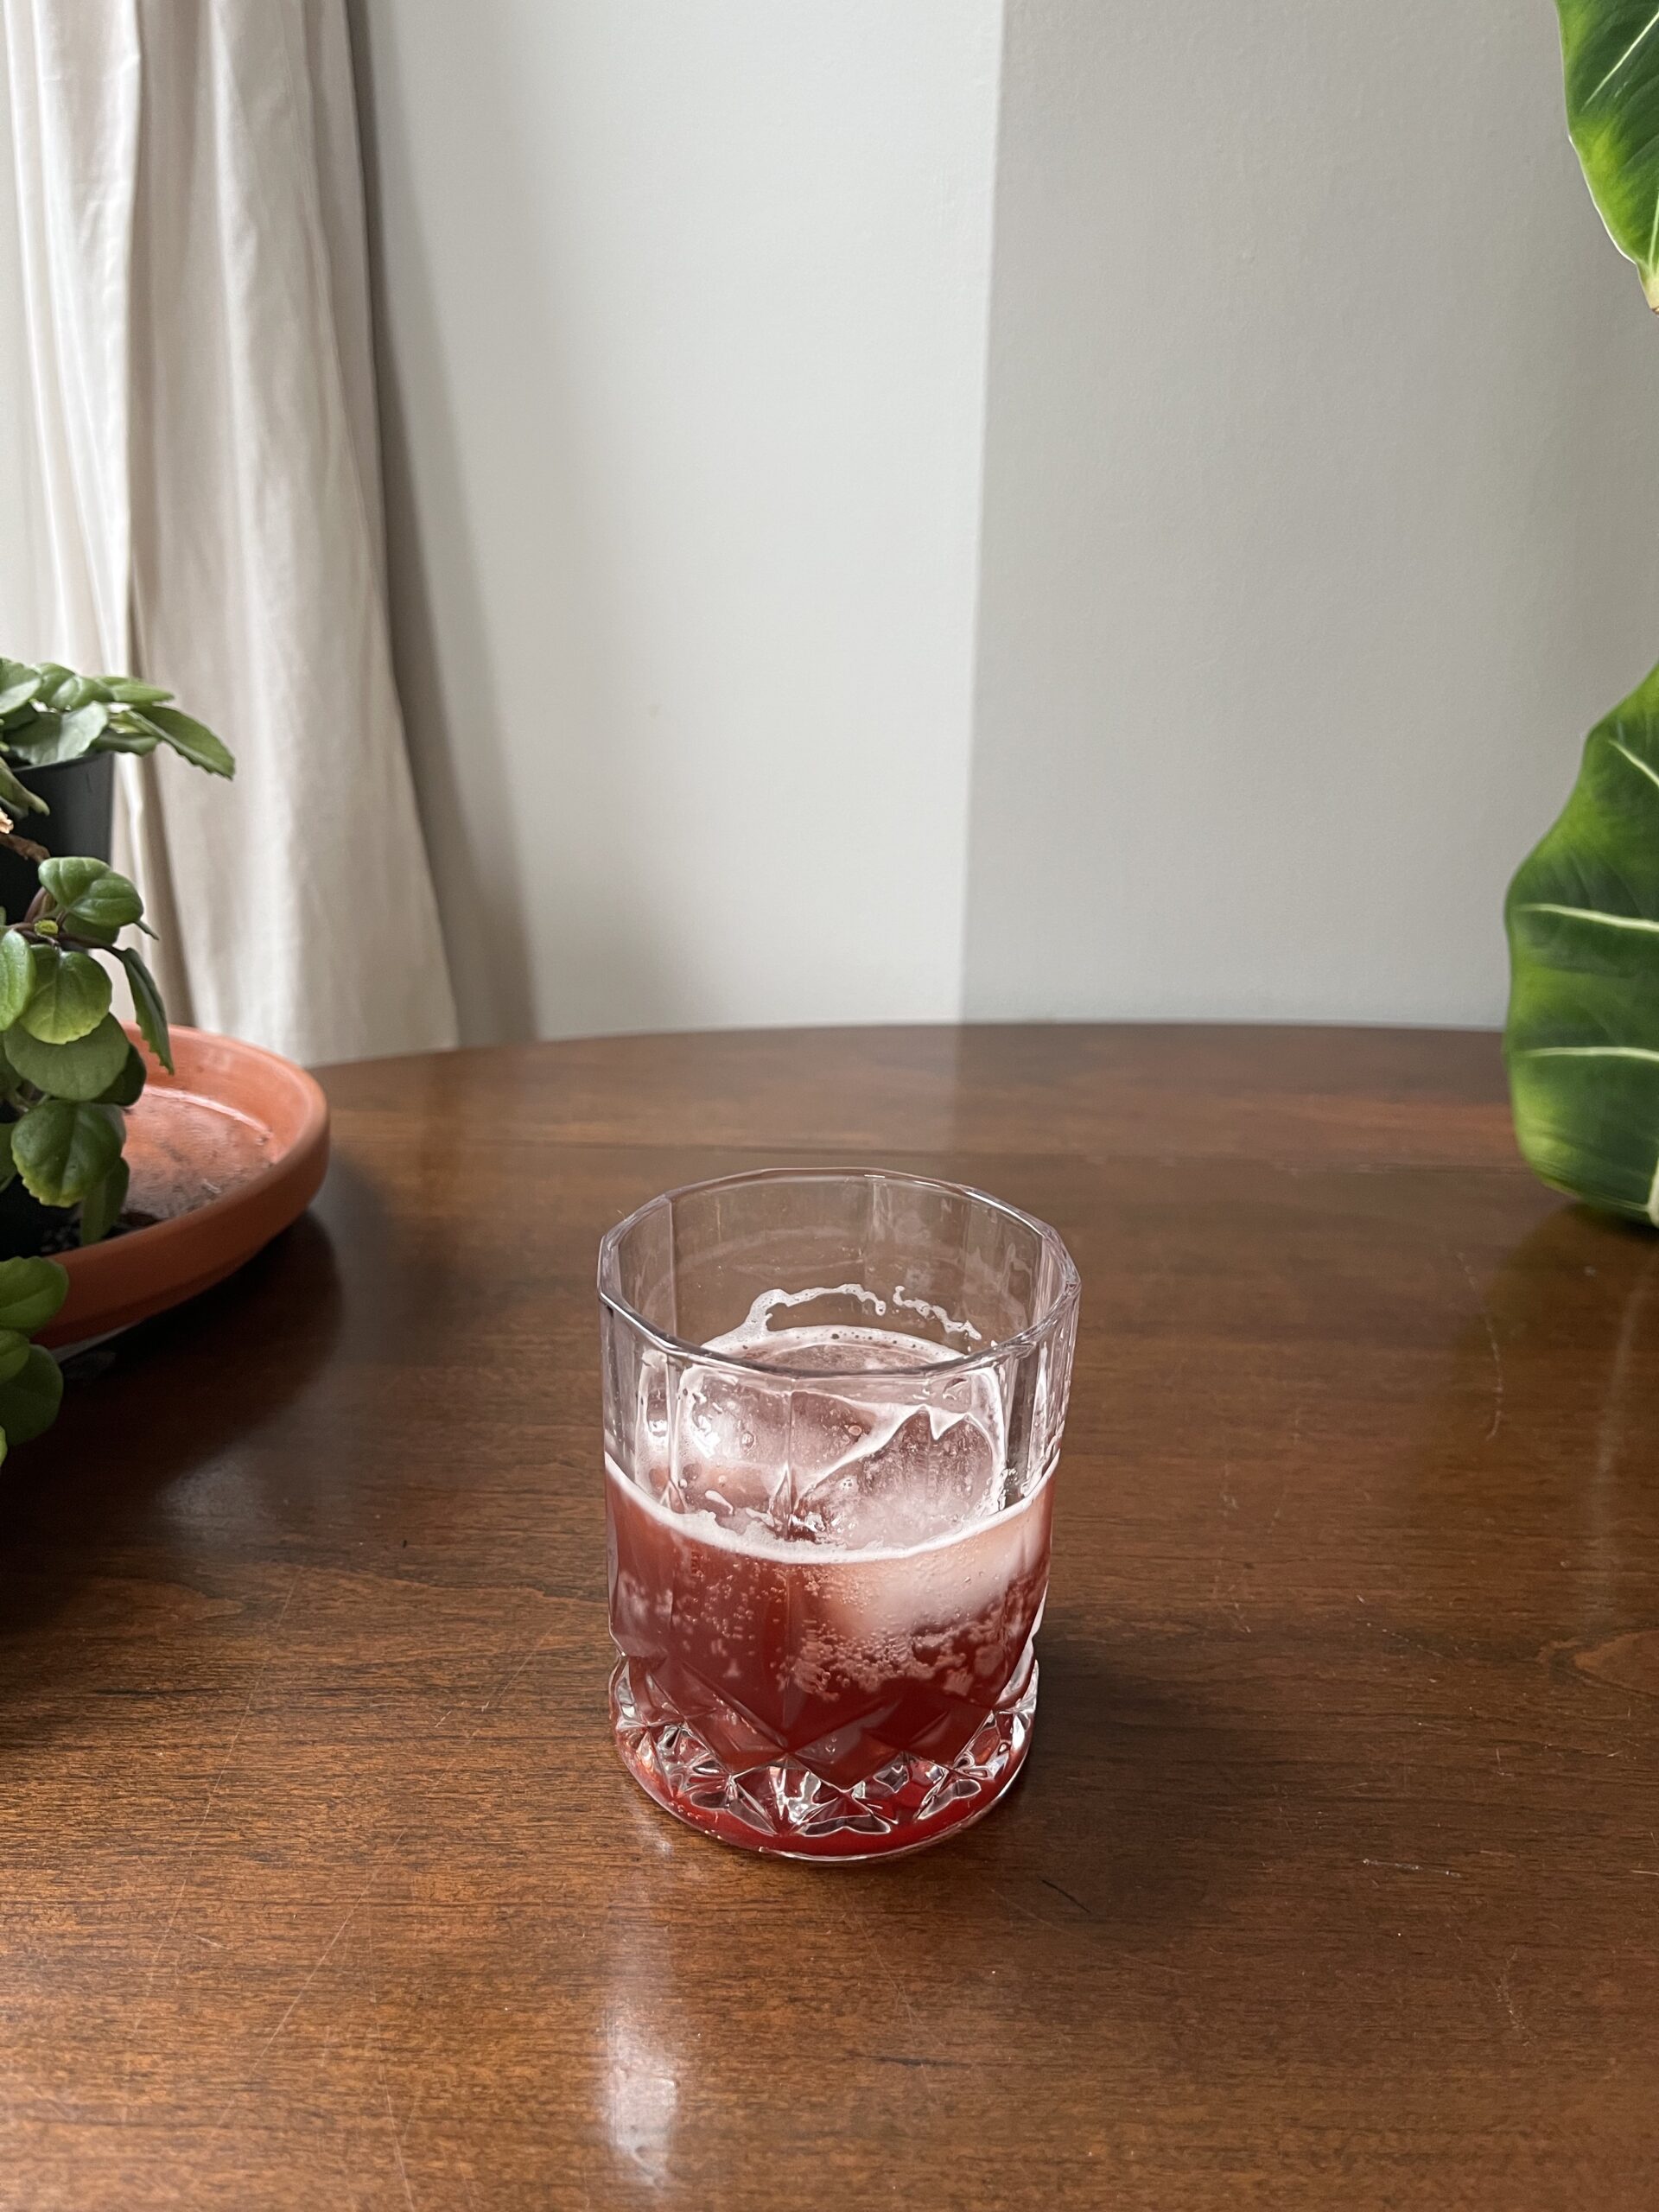 A clear glass with red liquid and ice sits on a wooden table. There is a green potted plant on the left and part of a large leaf on the right. White curtains are in the background.